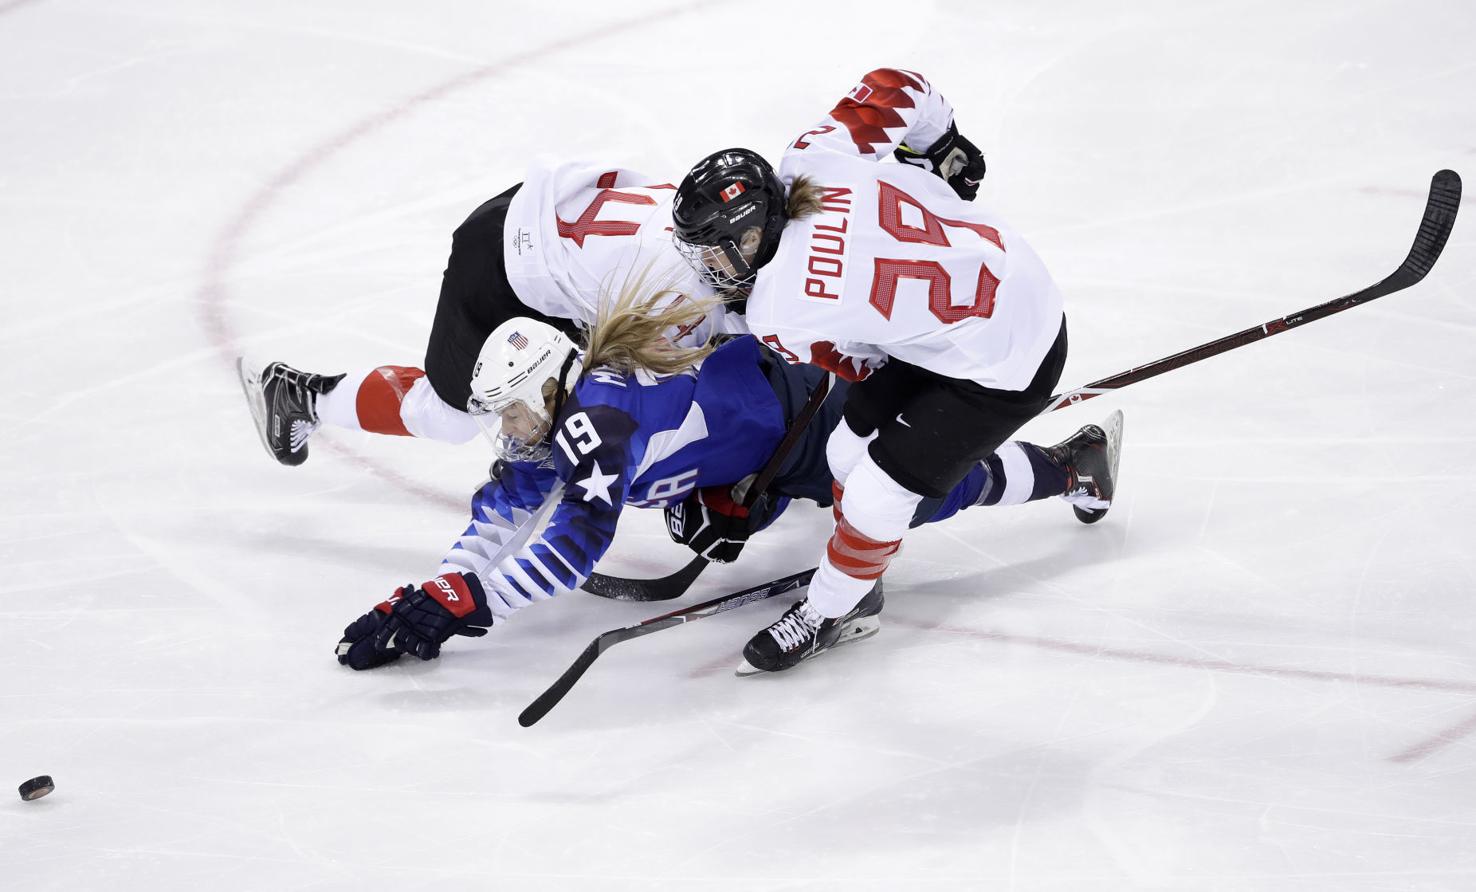 Photos from Team USA's thrilling victory over Canada in the Olympics